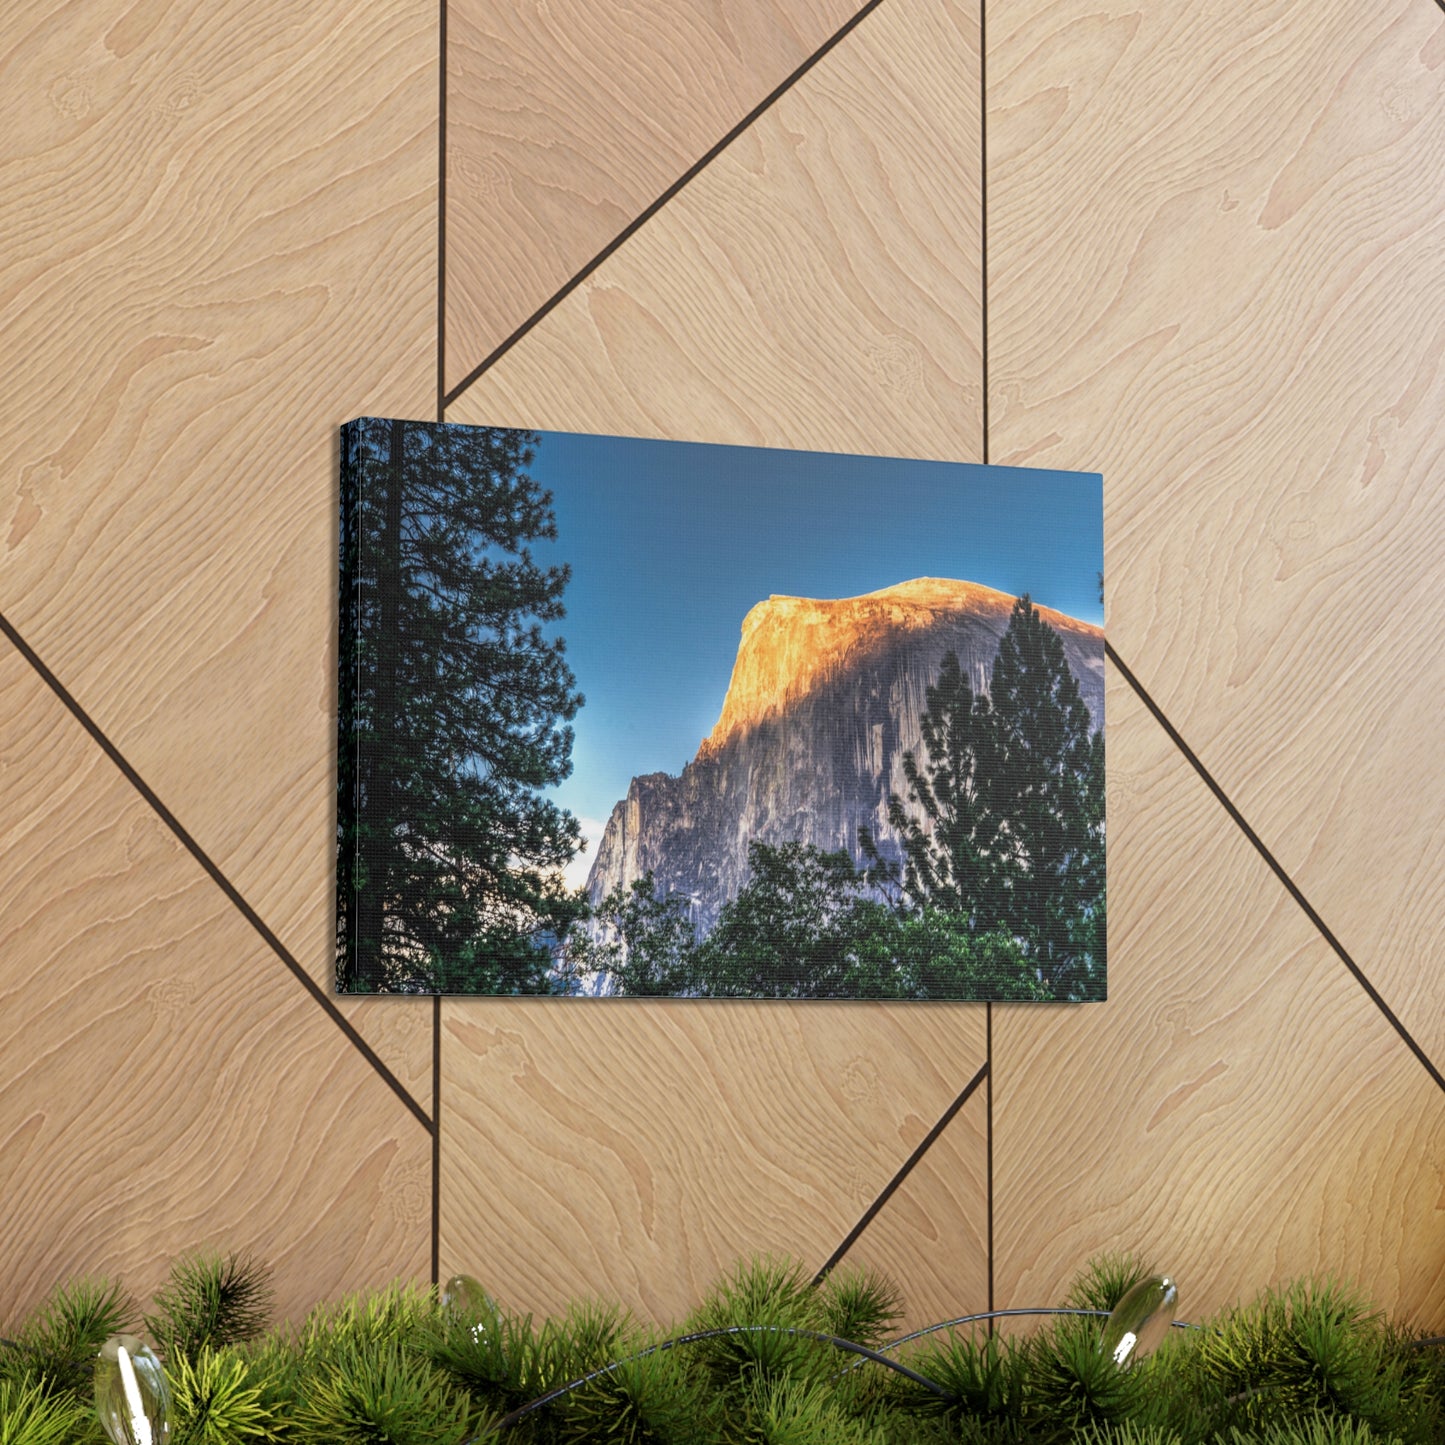 Canvas Print Of A Sunset On Half Dome in Yosemite For Wall Art